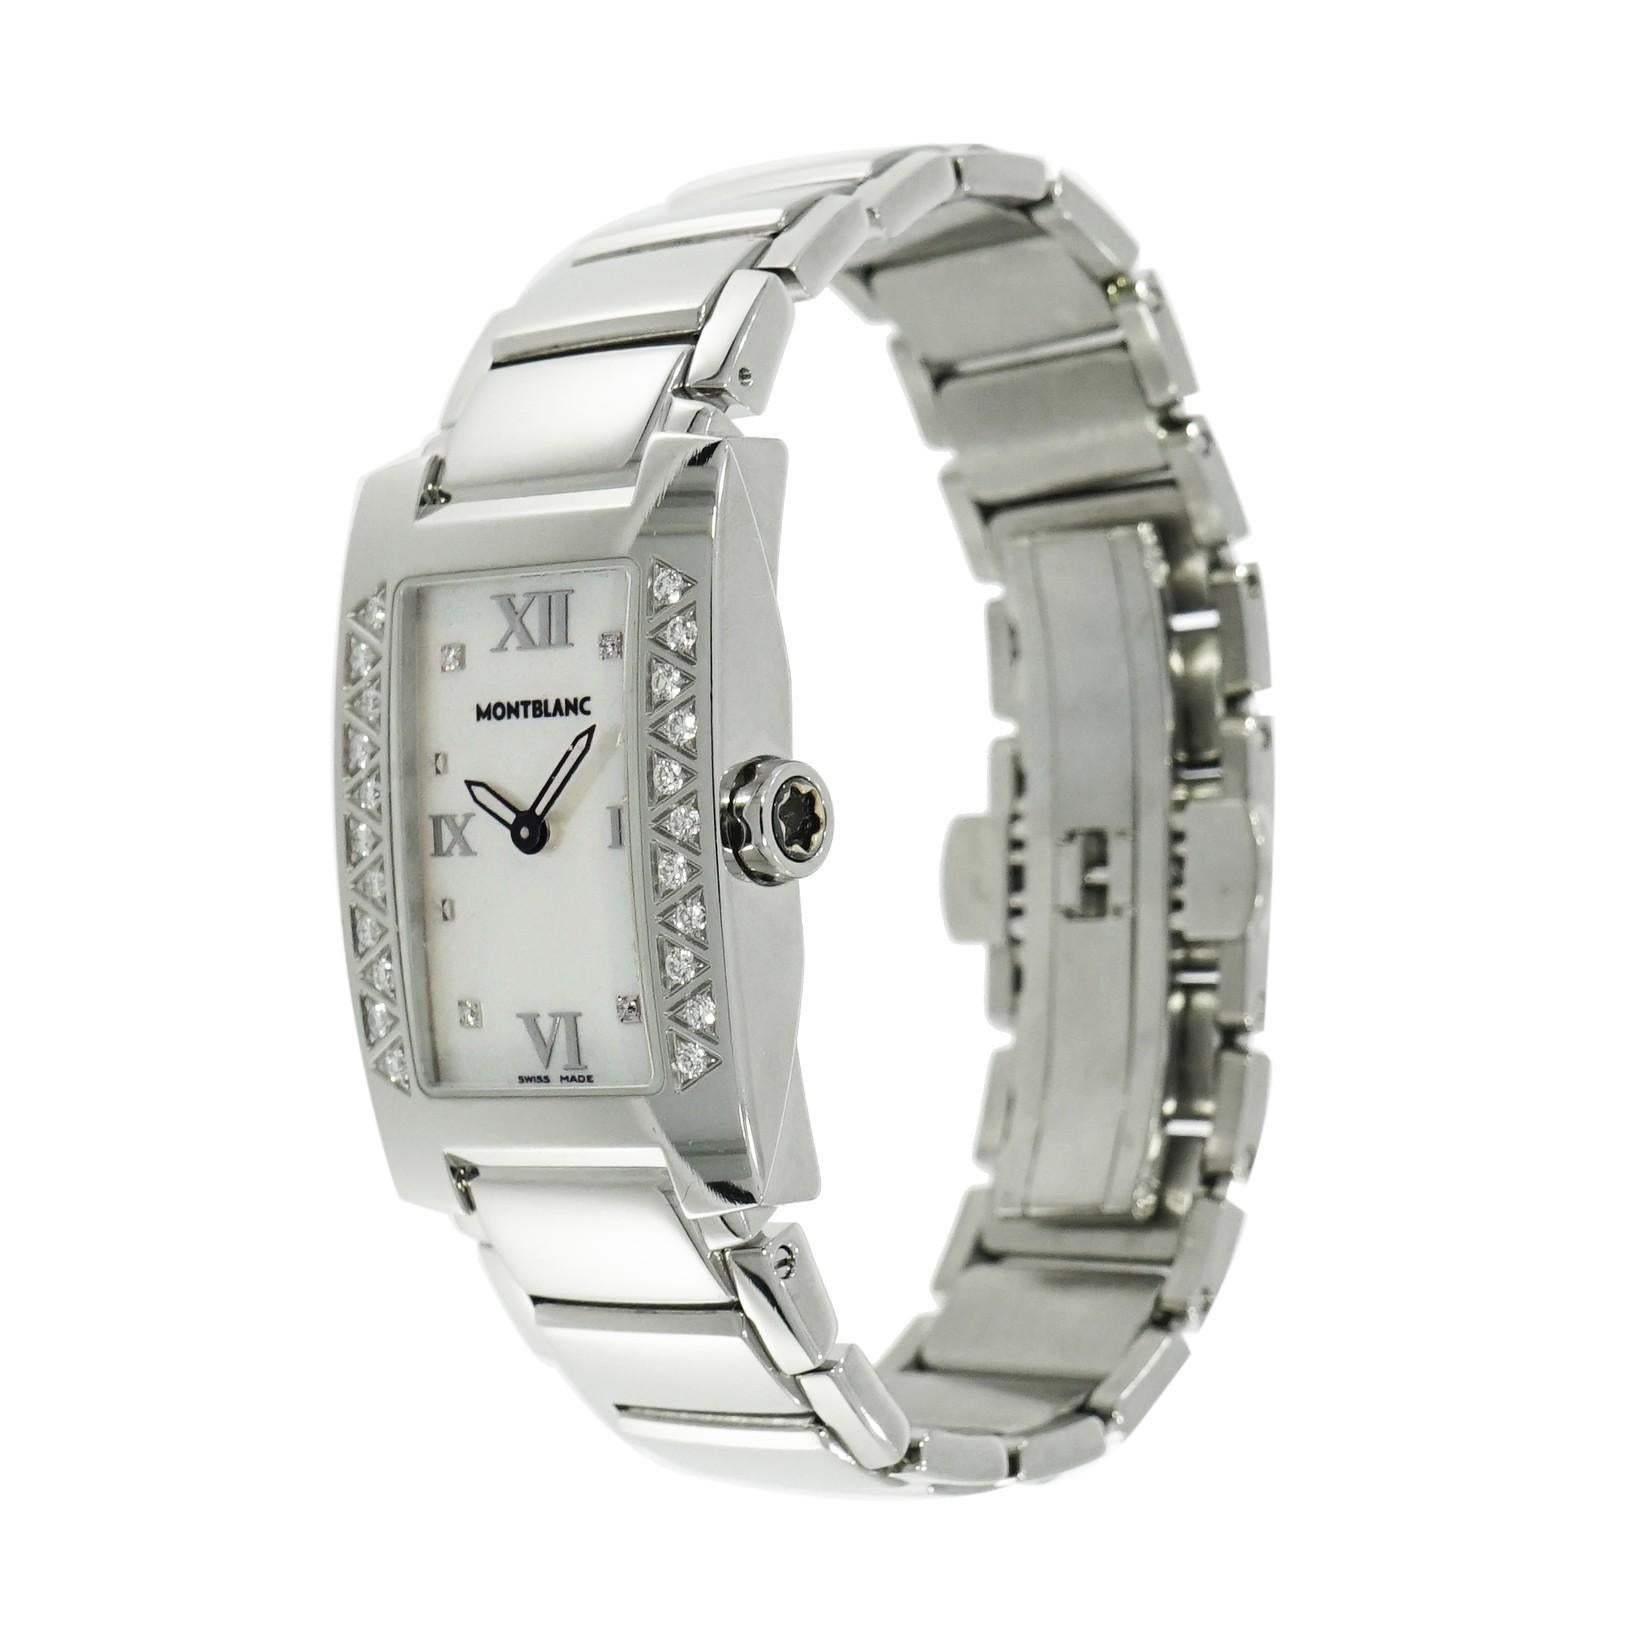 Pre-owned Lady’s Montblanc Profile Elegance, stainless steel 23.5x 35 mm case, with diamonds on the bezel, white mother of pearl dial with Roman numeral and dots hour markers, quartz  movement, on a stainless steel bracelet with butterfly clasp.